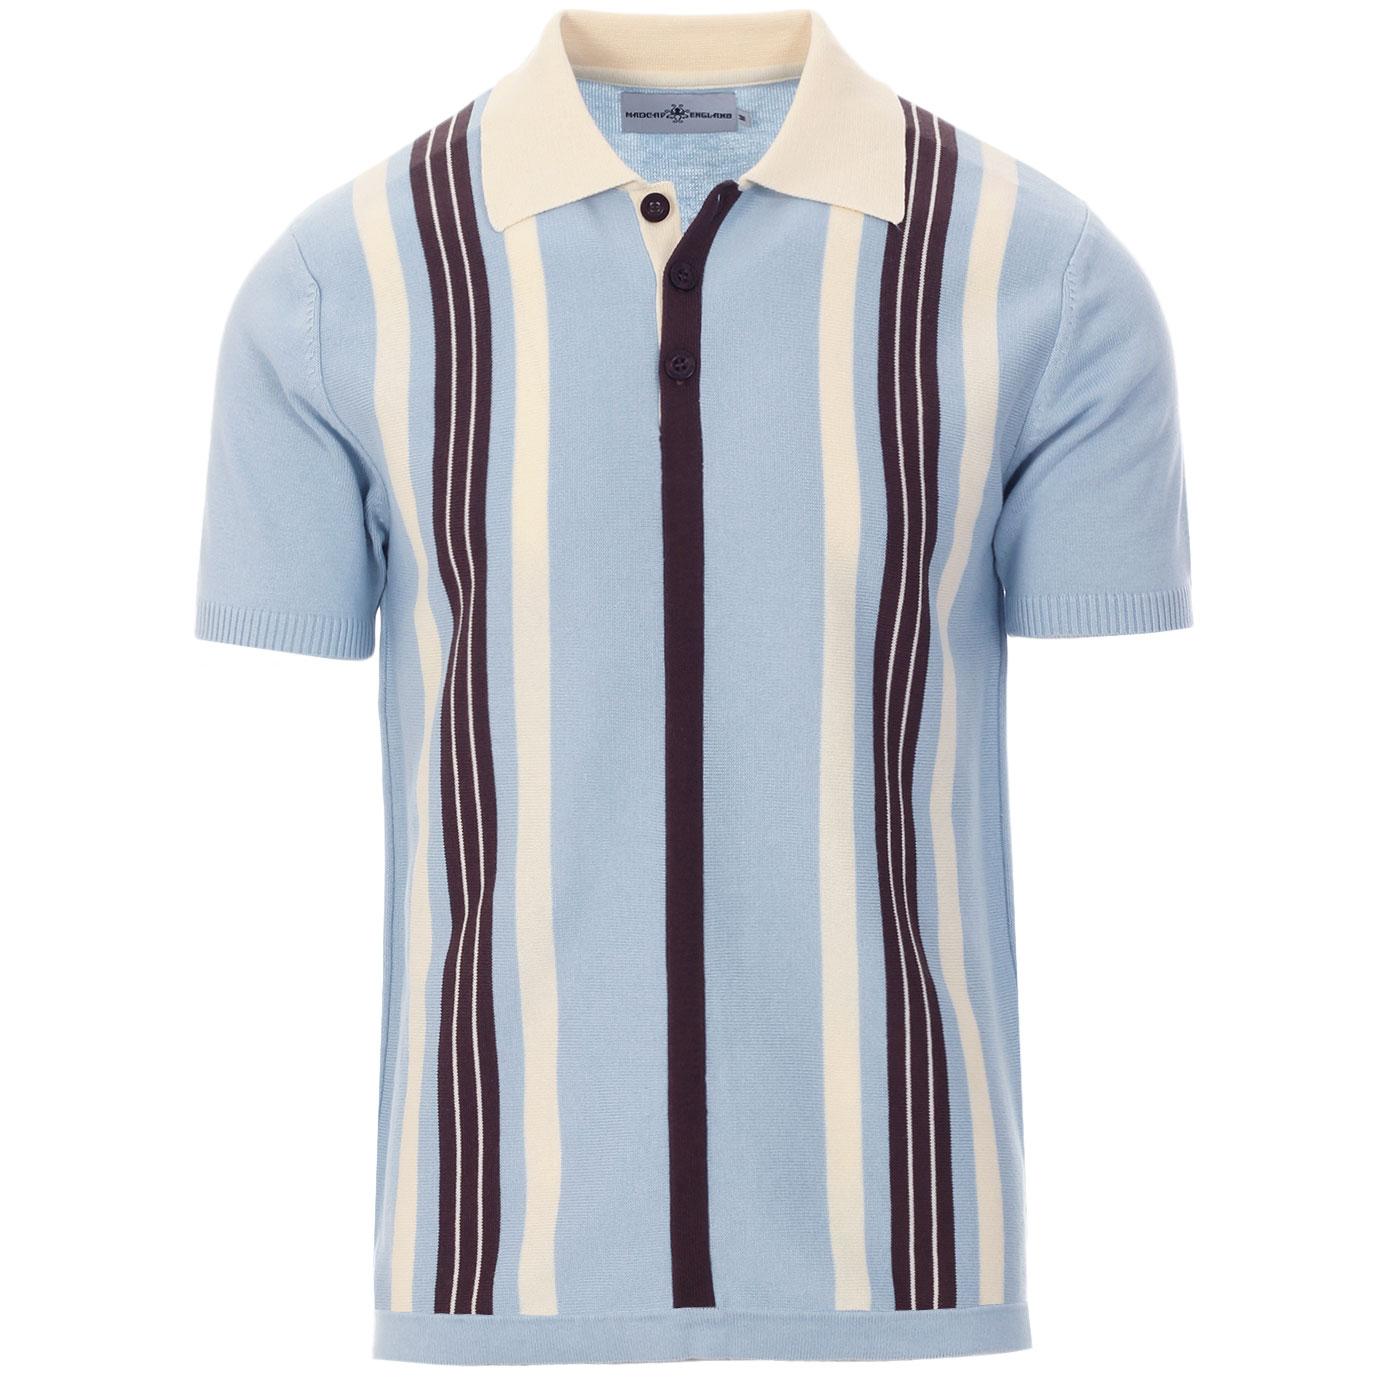 Madcap England Farlowe 60s Mod Knitted Stripe Polo Shirt in Winter Sky